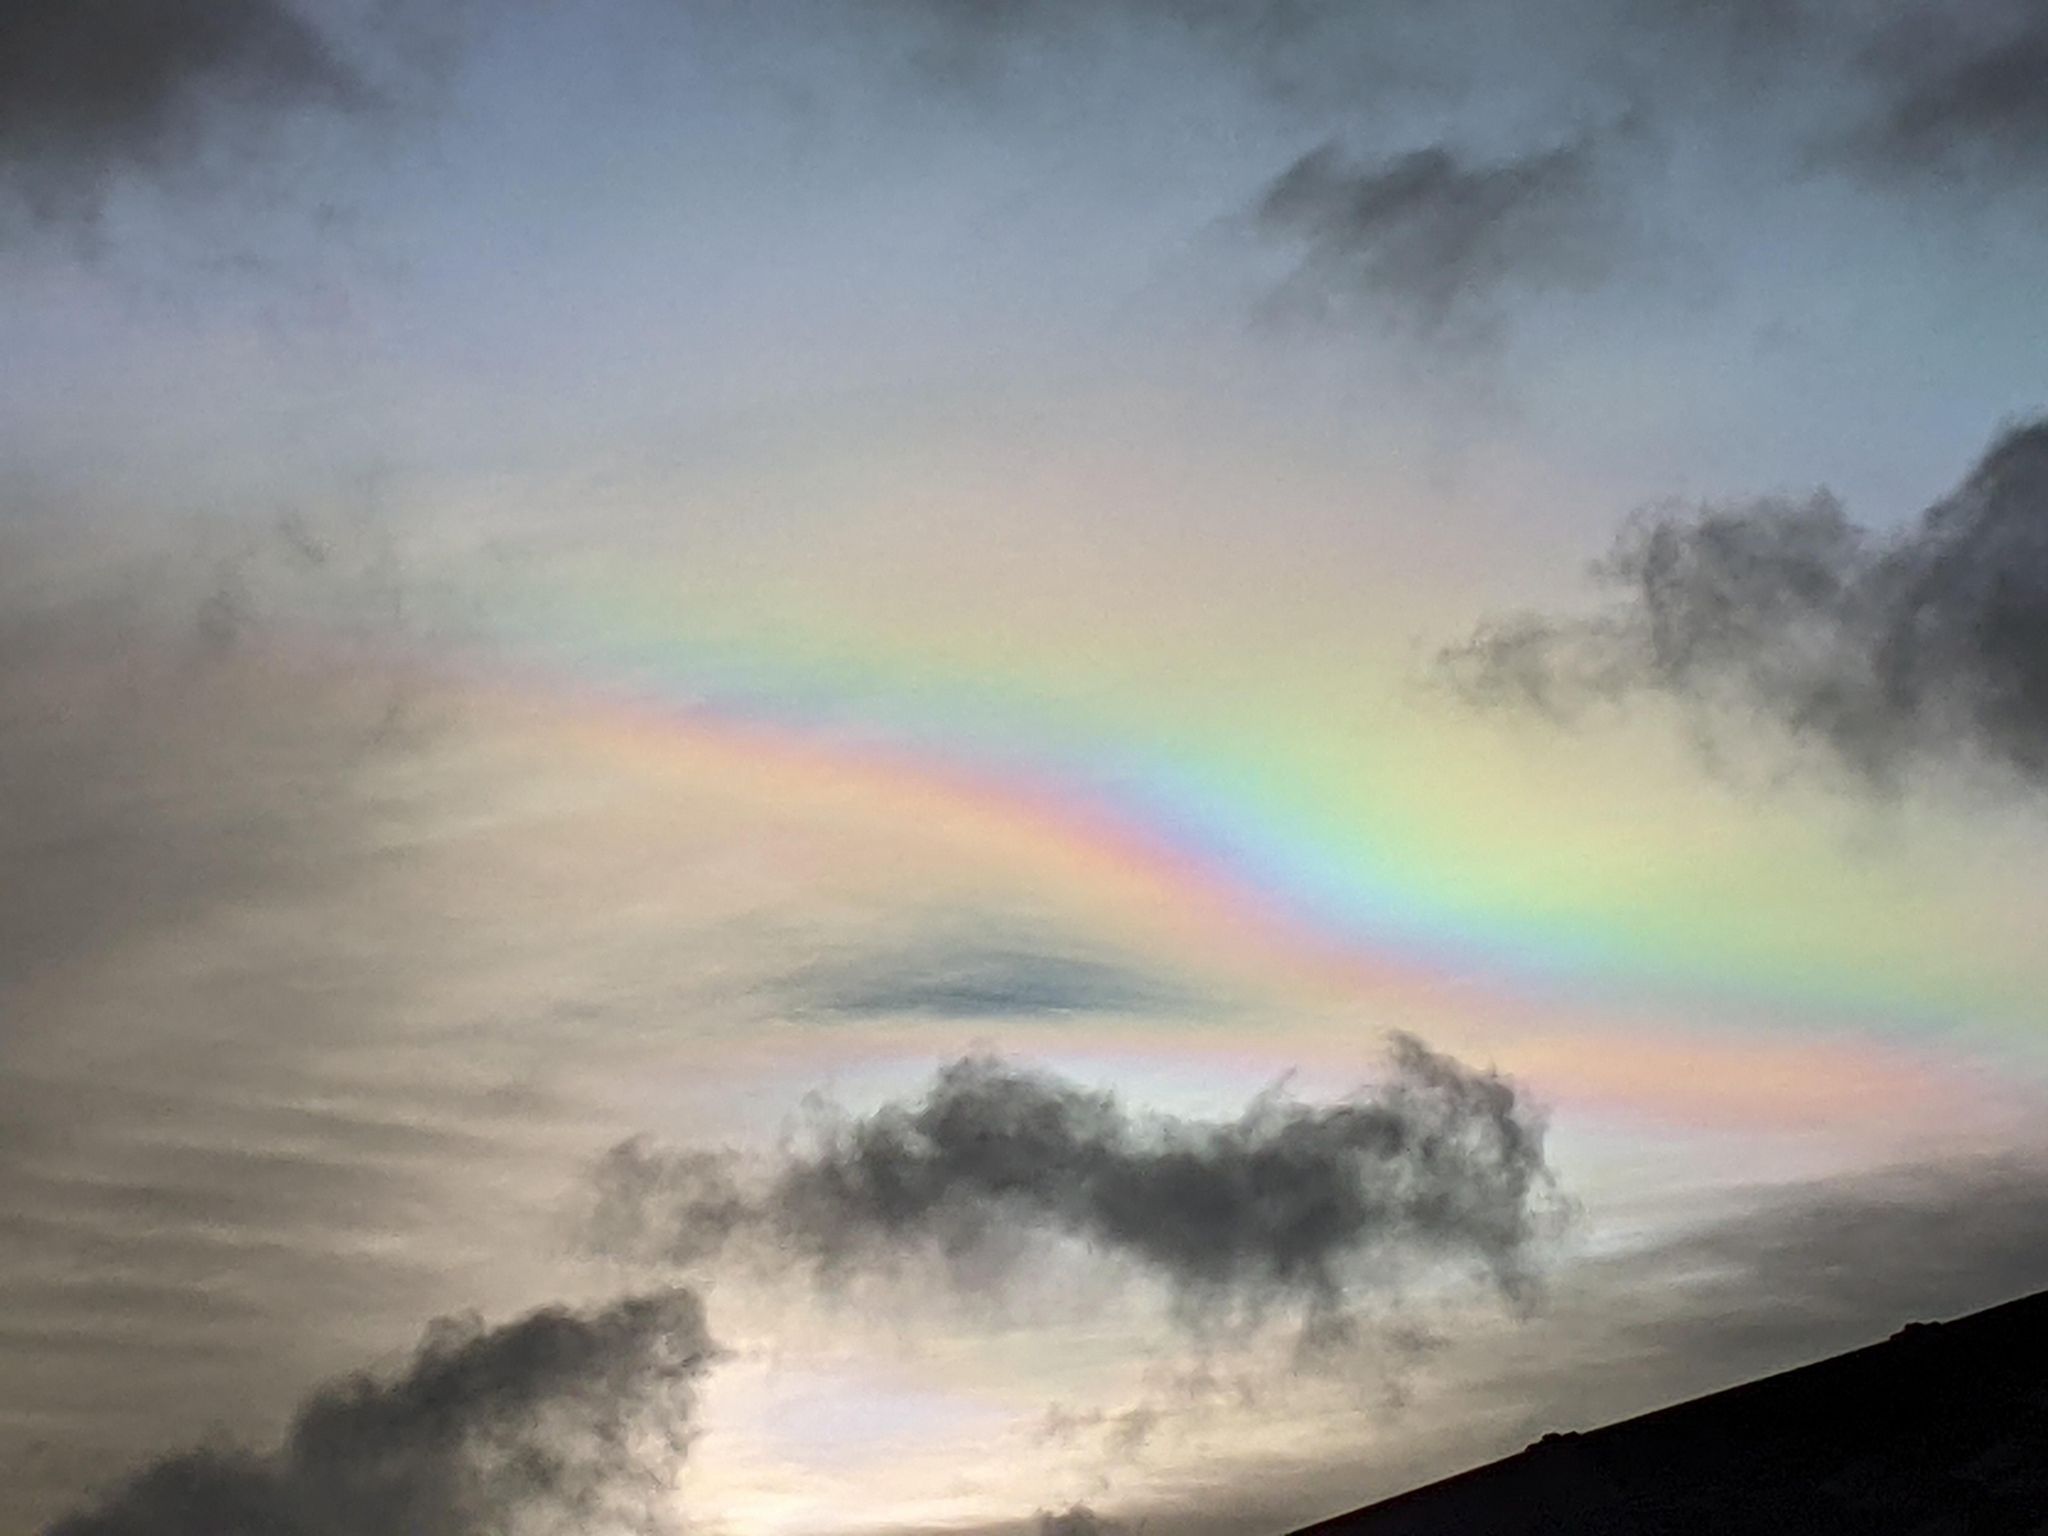 The clouds cast a colourful display in the skies over Menston, West Yorkshire